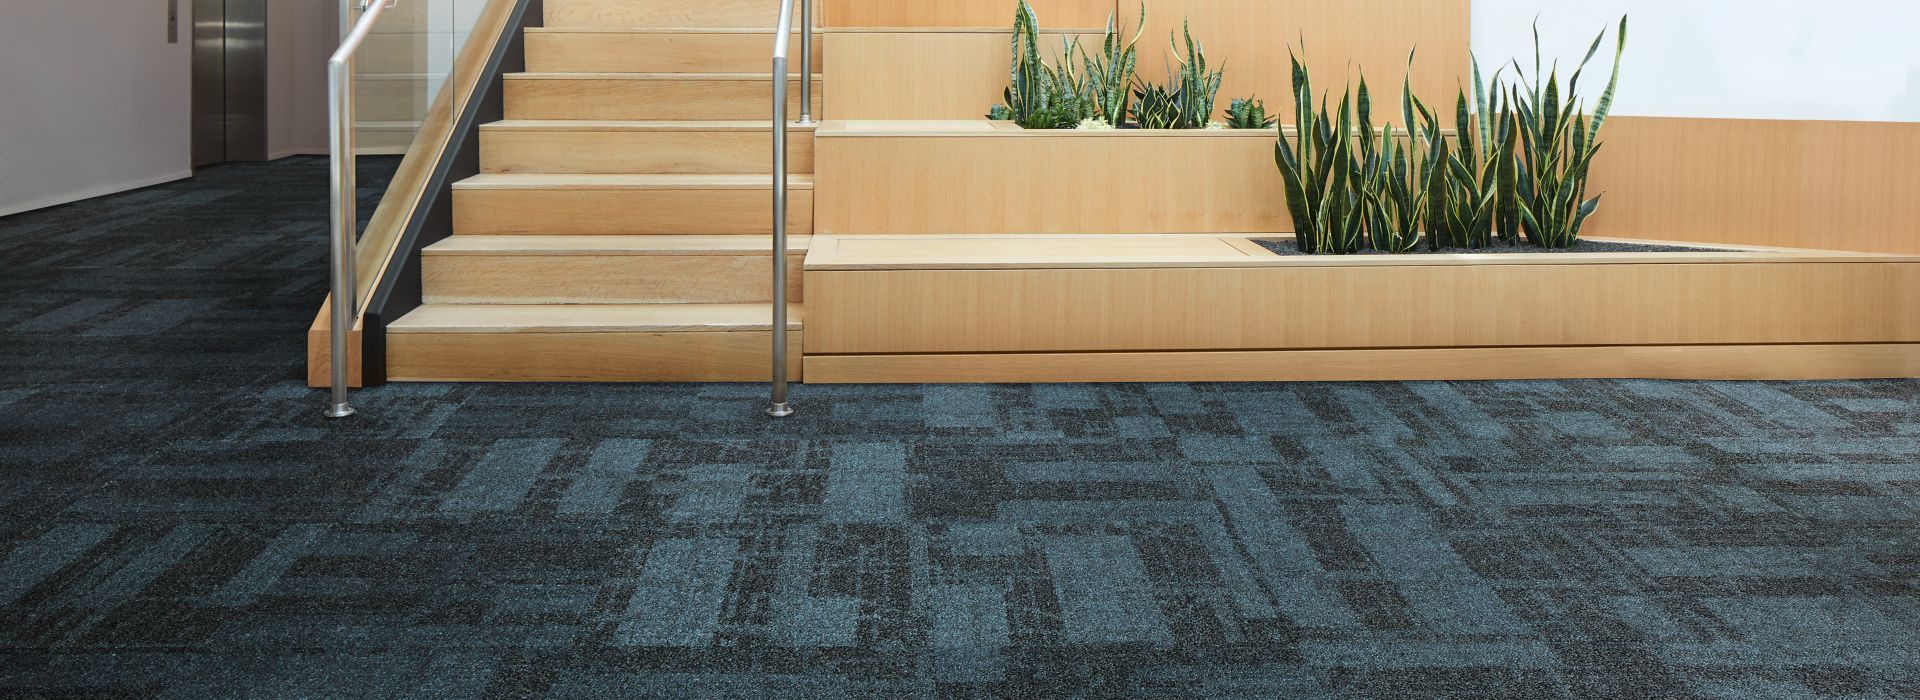 Interface Dynamic Duo carpet tile in entryway with stairs  imagen número 2